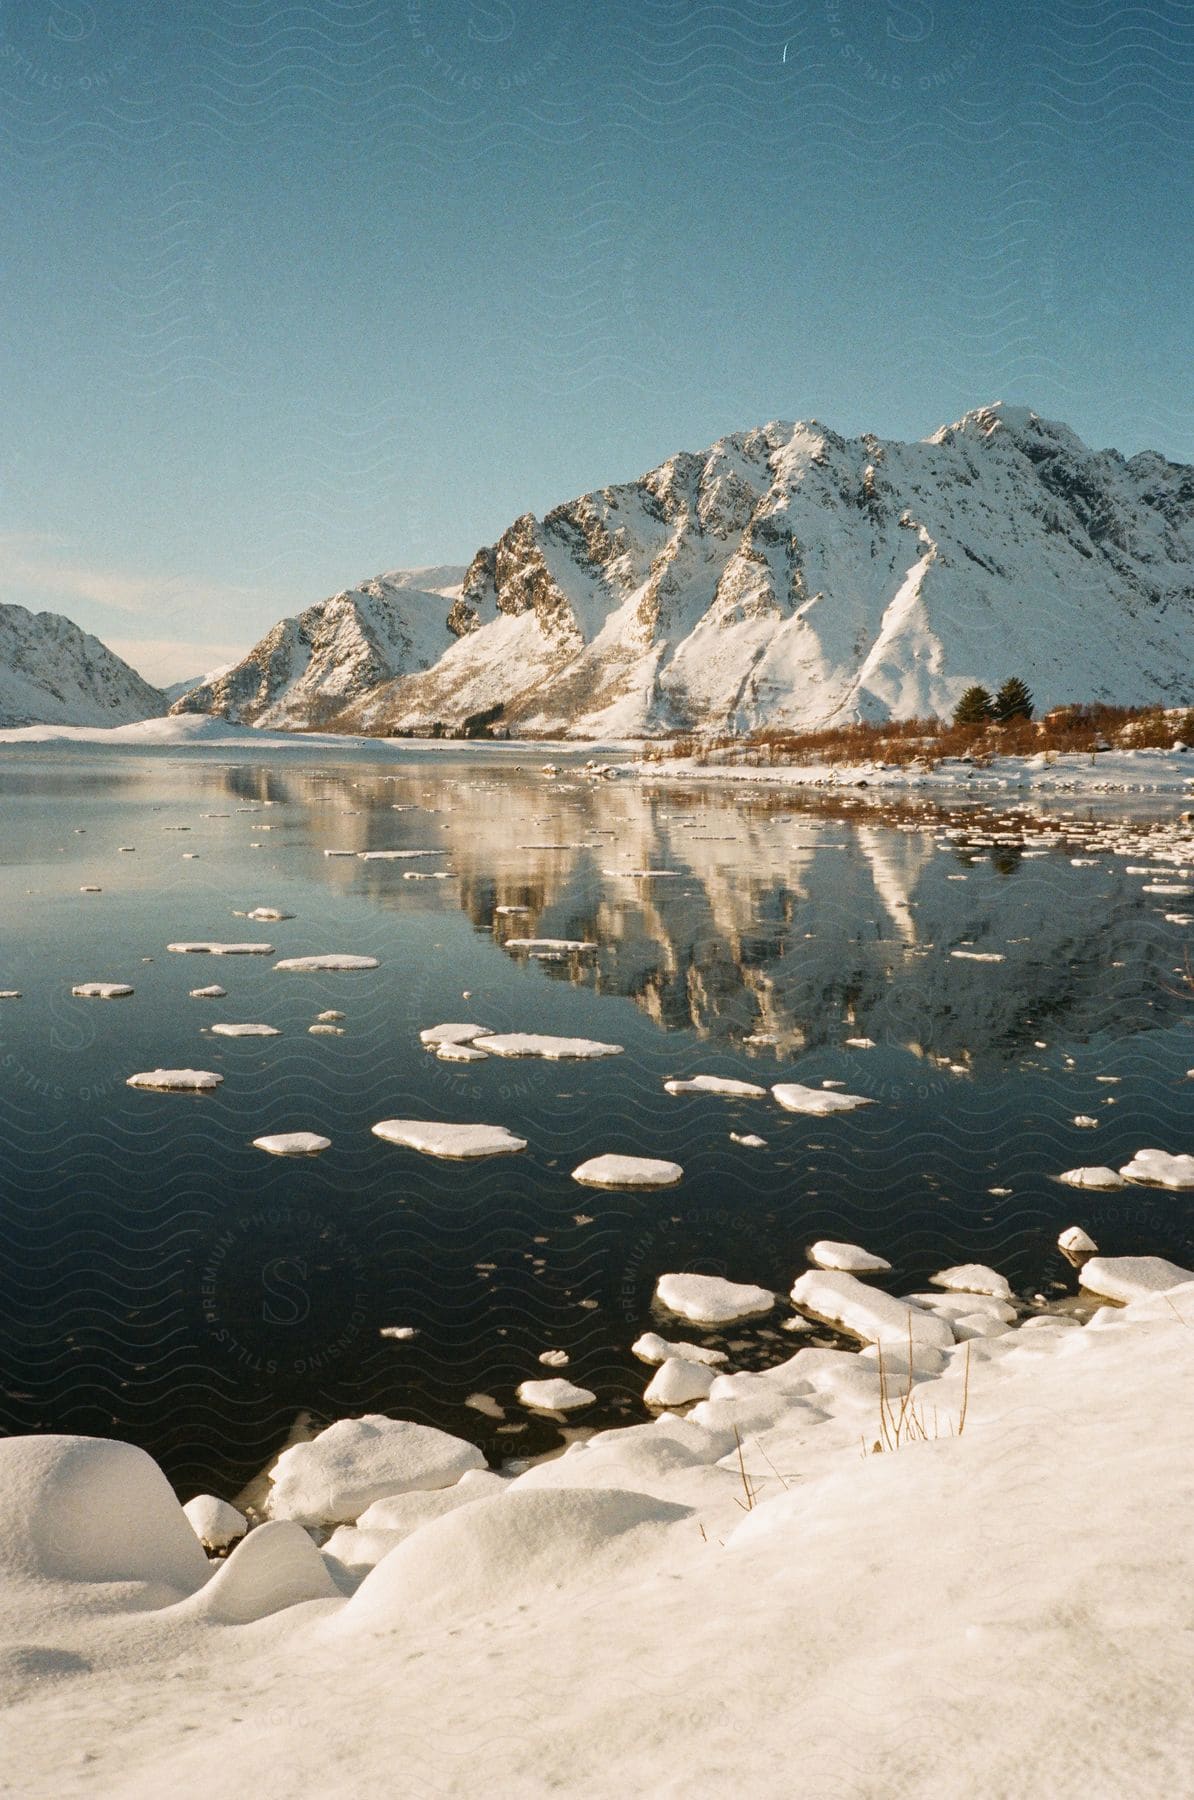 Snow and ice float on a lake surrounded by mountains on a clear day